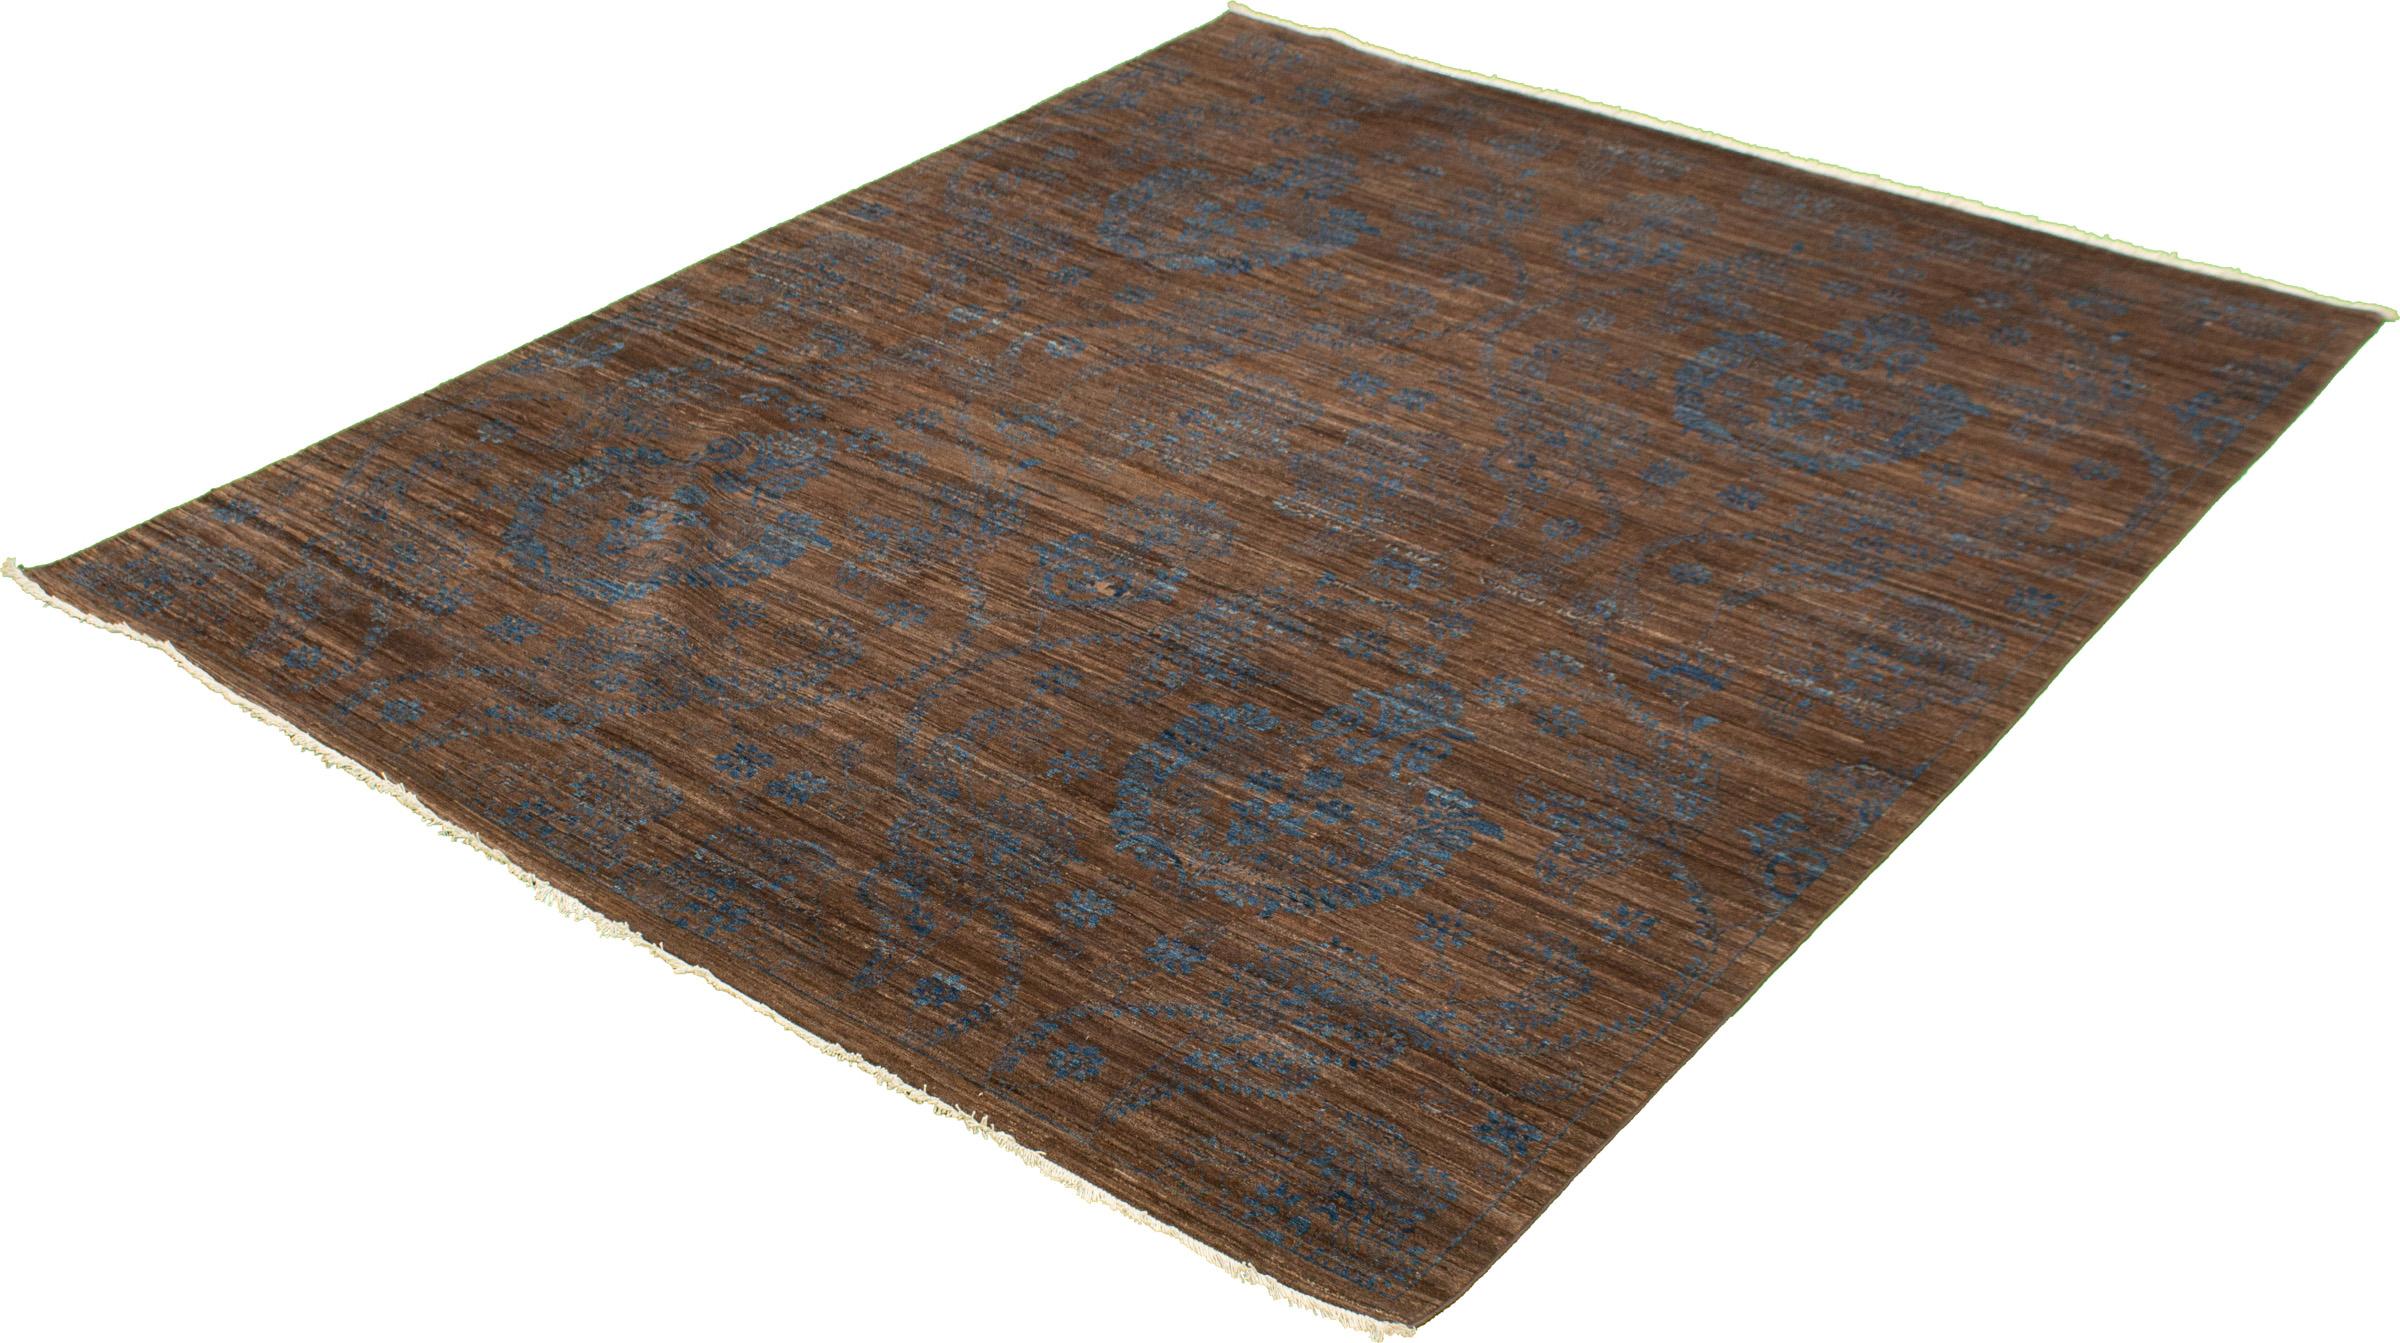 Vegetable Dyed Hand-Knotted Wool Blue and Brown Persian Rug, 8’ x 10’ For Sale